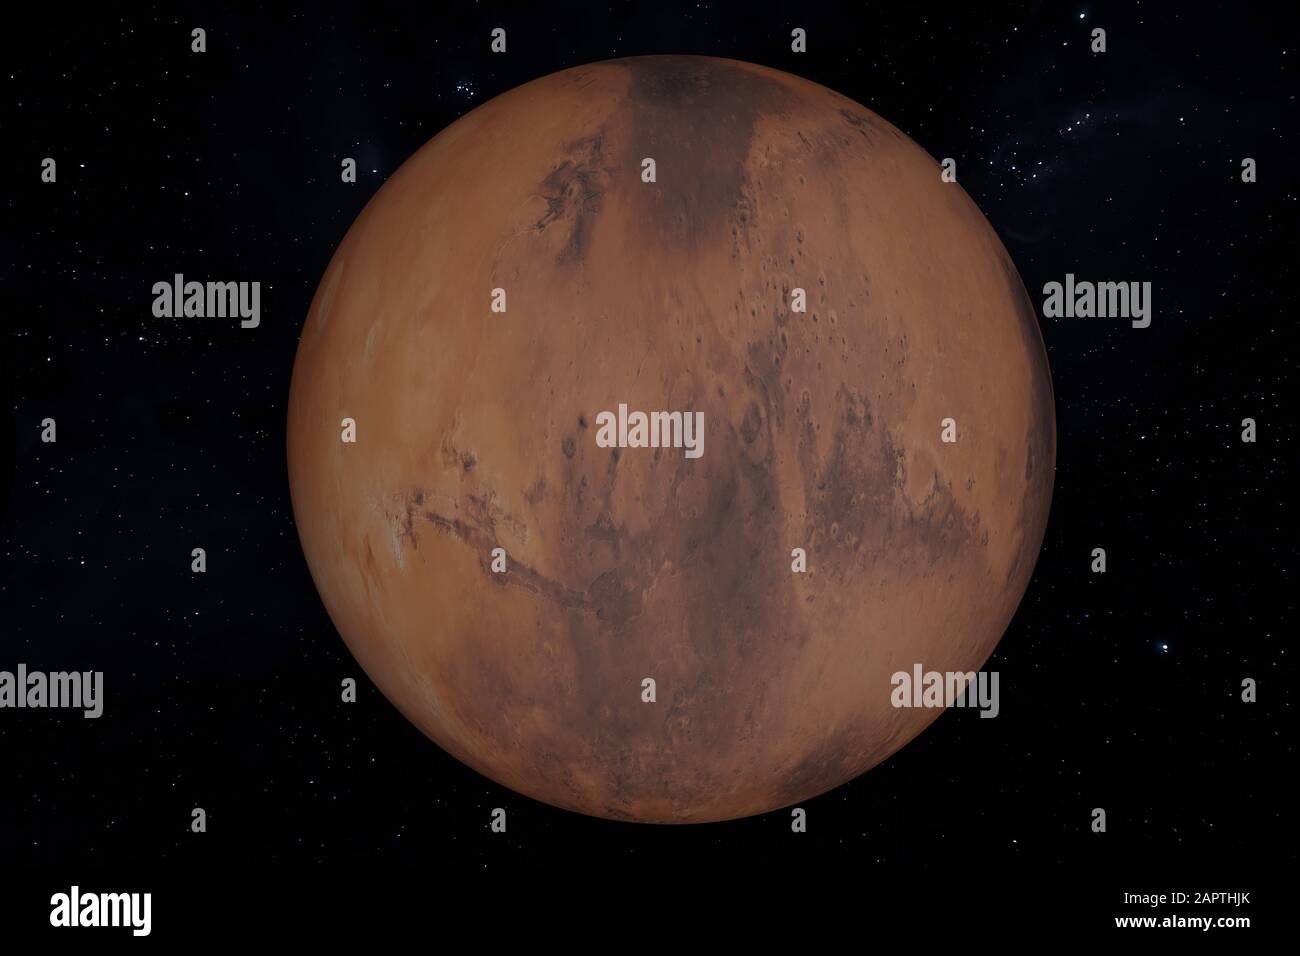 3d Illustration of the Planet Mars on a star background. Stock Photo